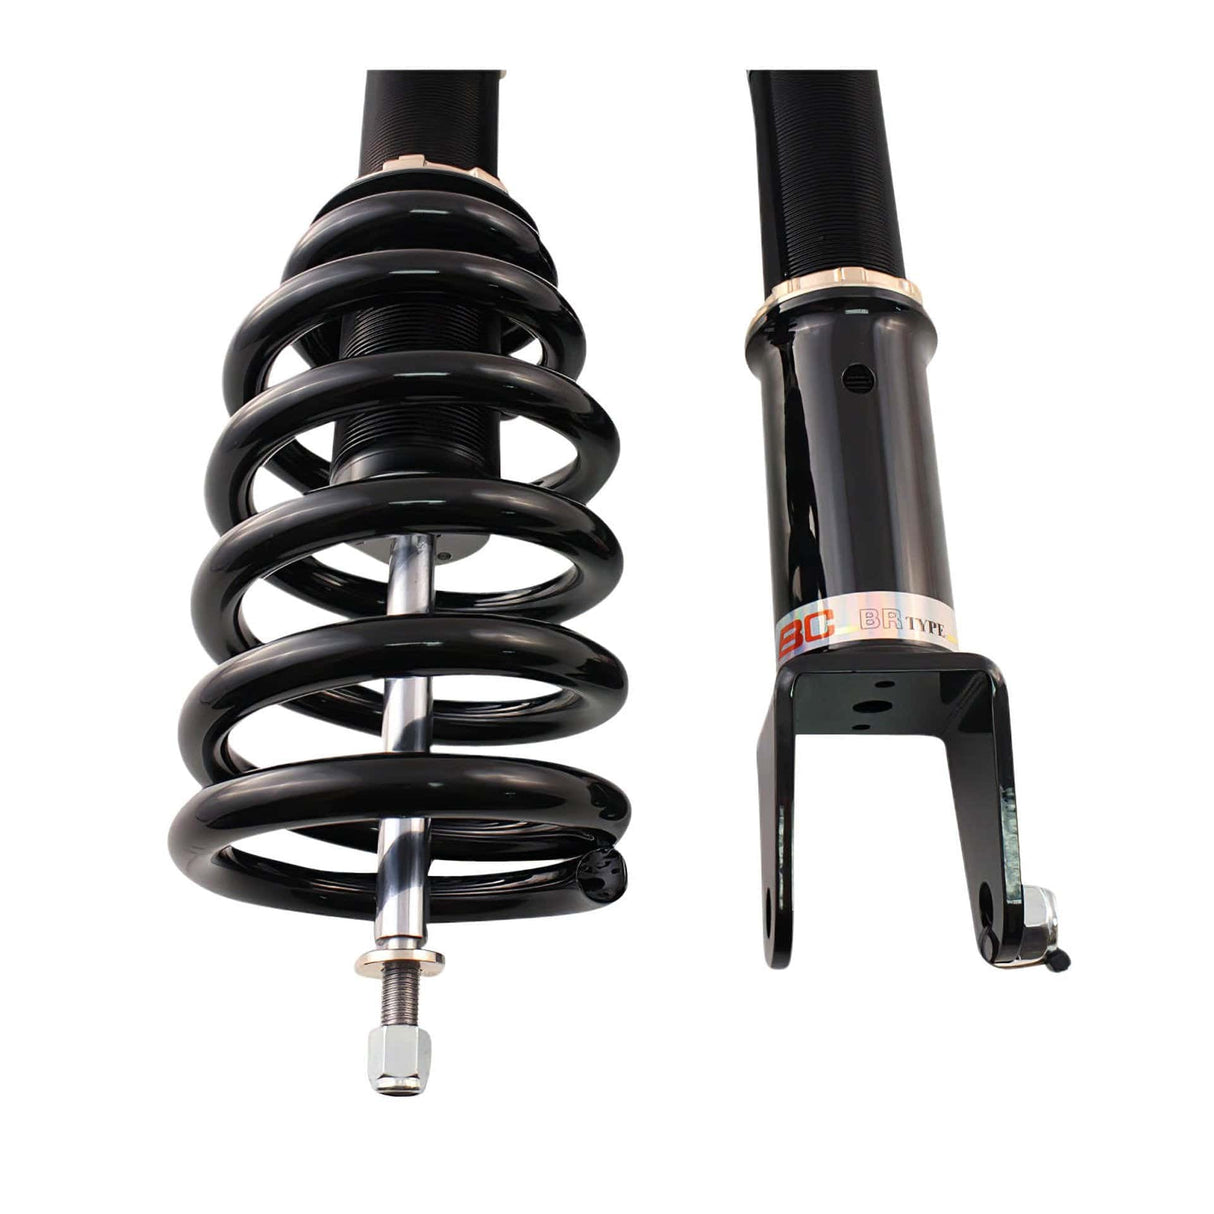 BC Racing BR Series Coilovers for 2010-2014 Cadillac CTS Wagon RWD